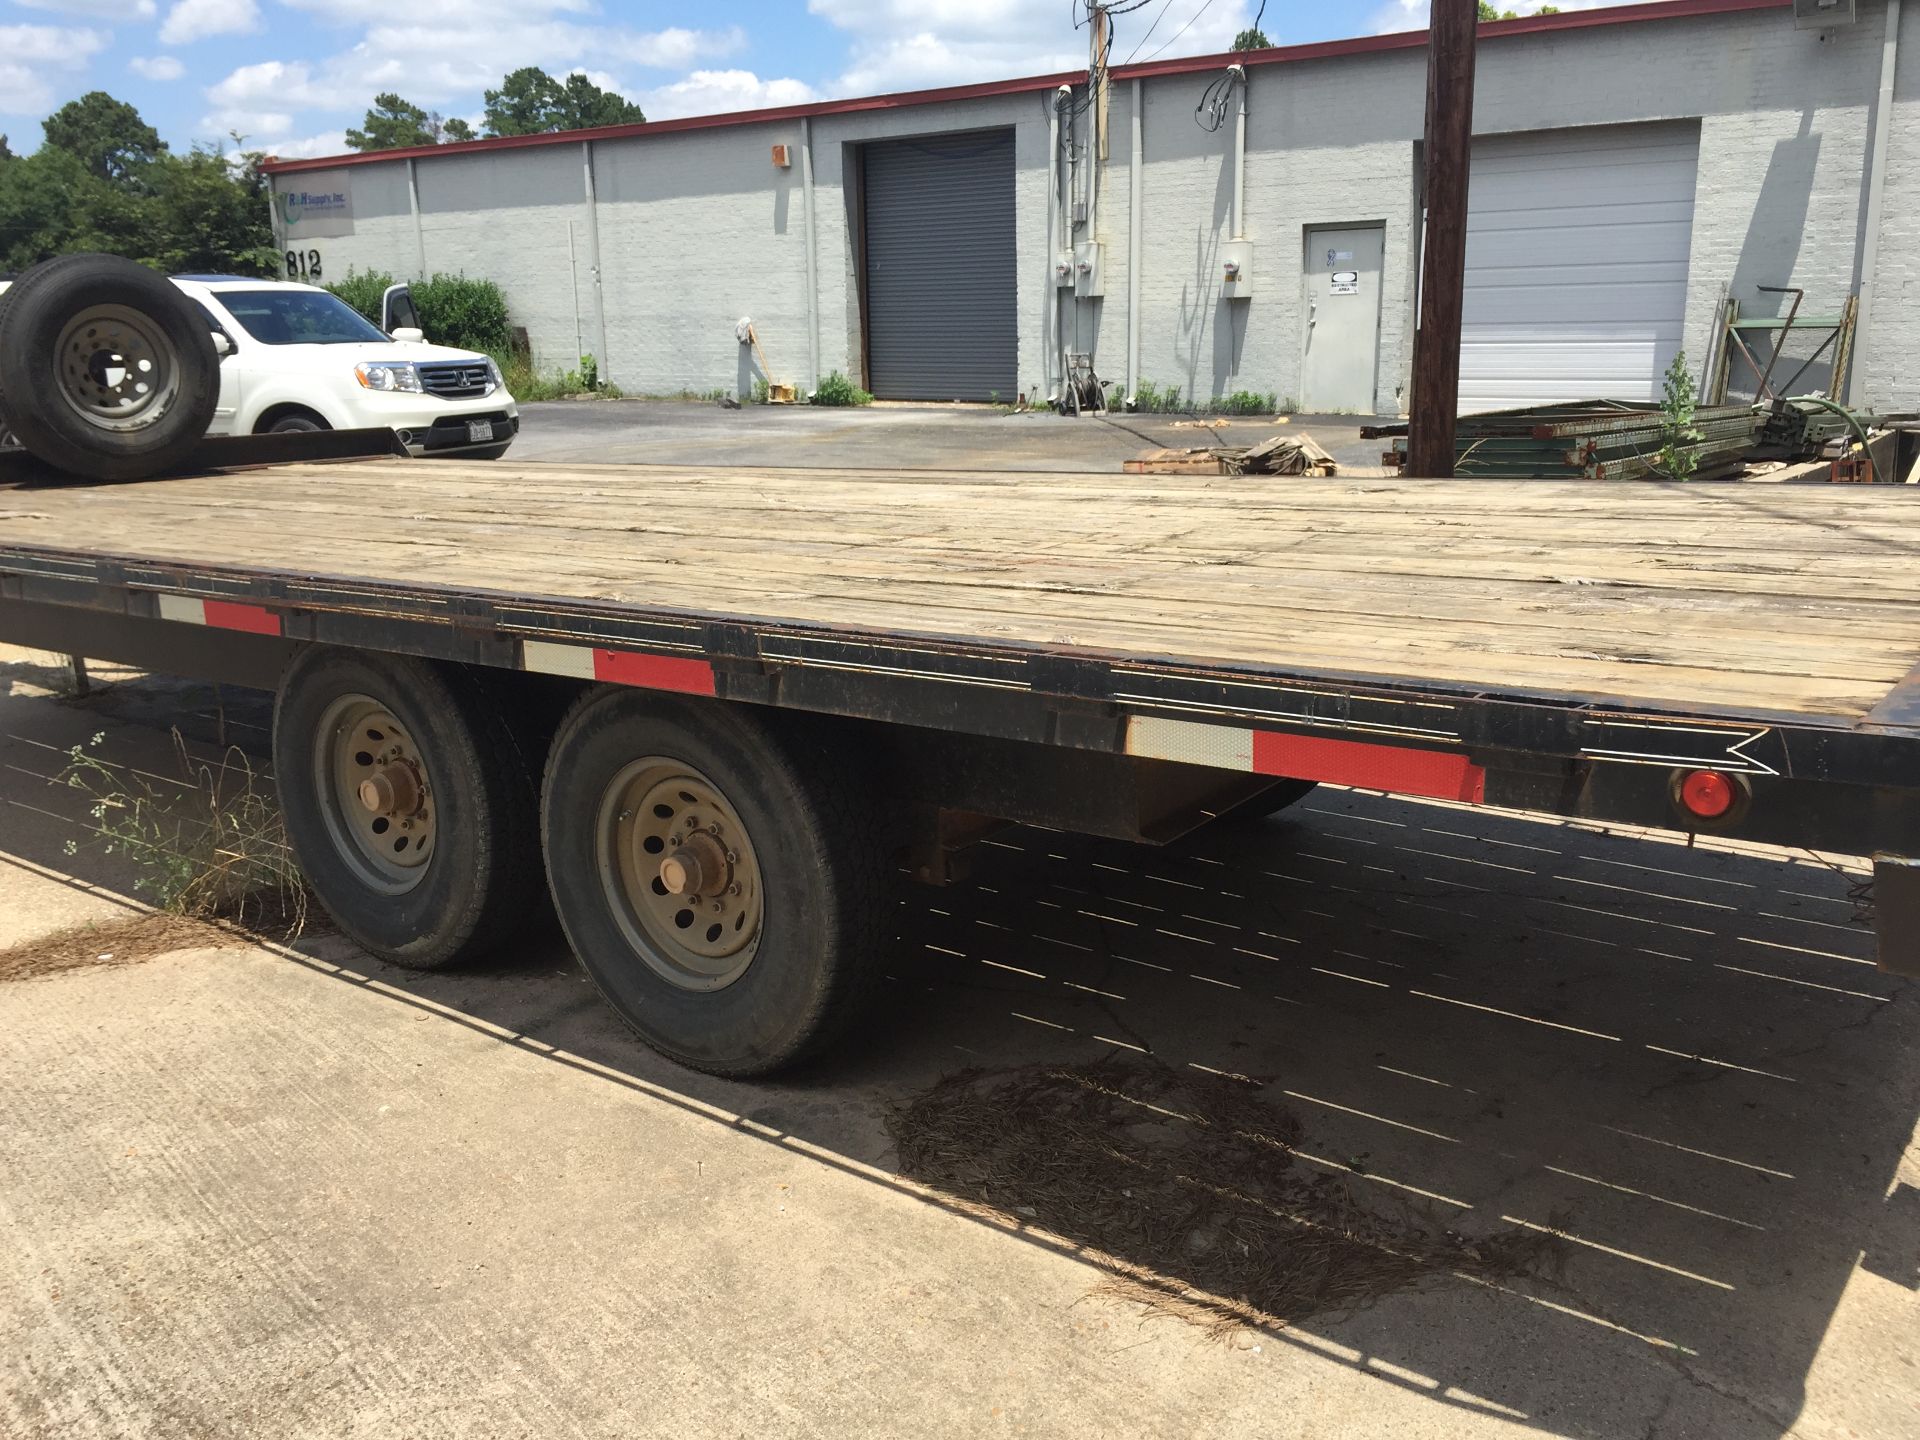 FLATBED TRAILER, new 2007, Â 20'L, 2,800 lb. empty weight, 11,200 carrying capacity